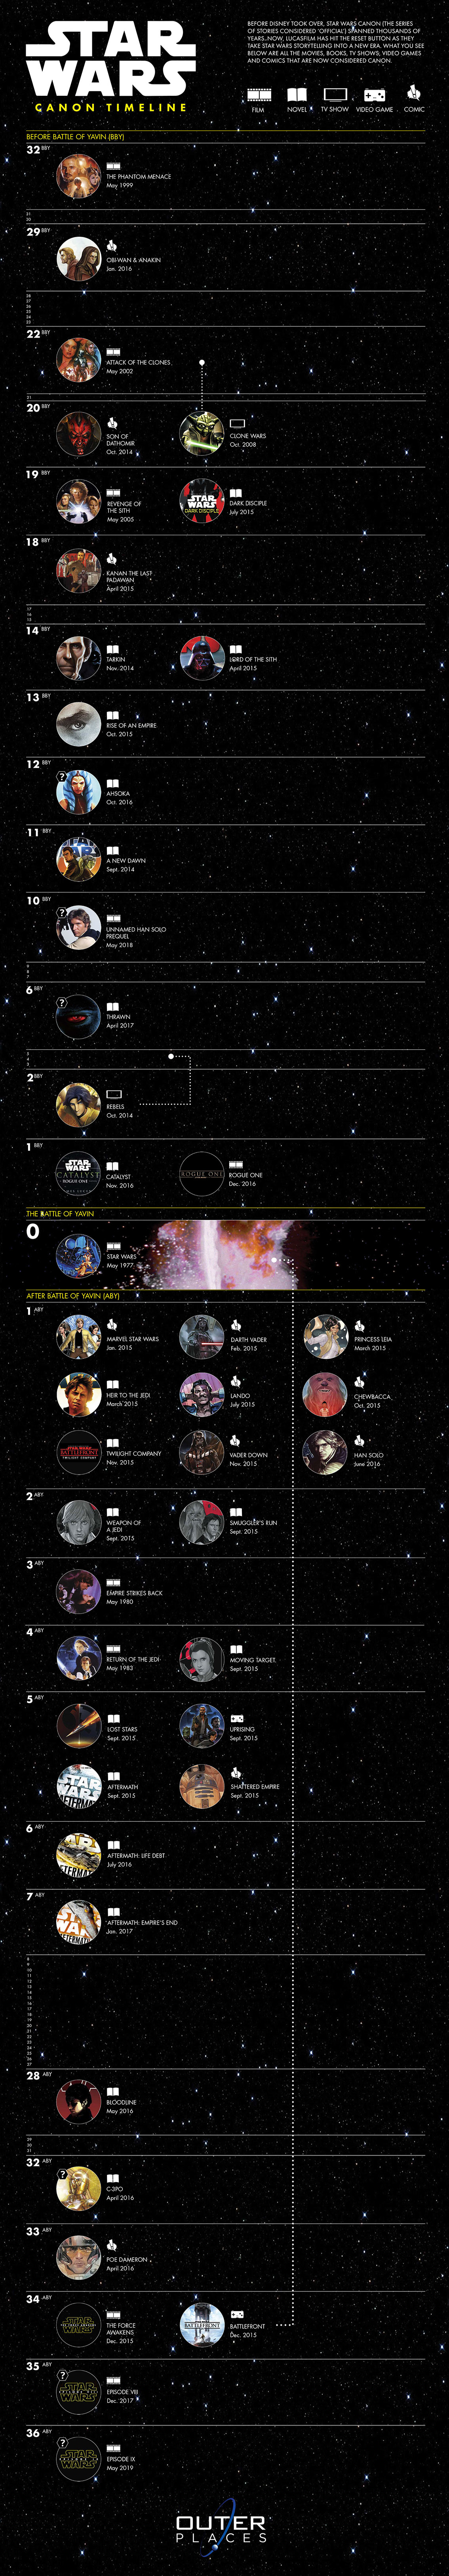 Star Wars Canon Timeline Infographic